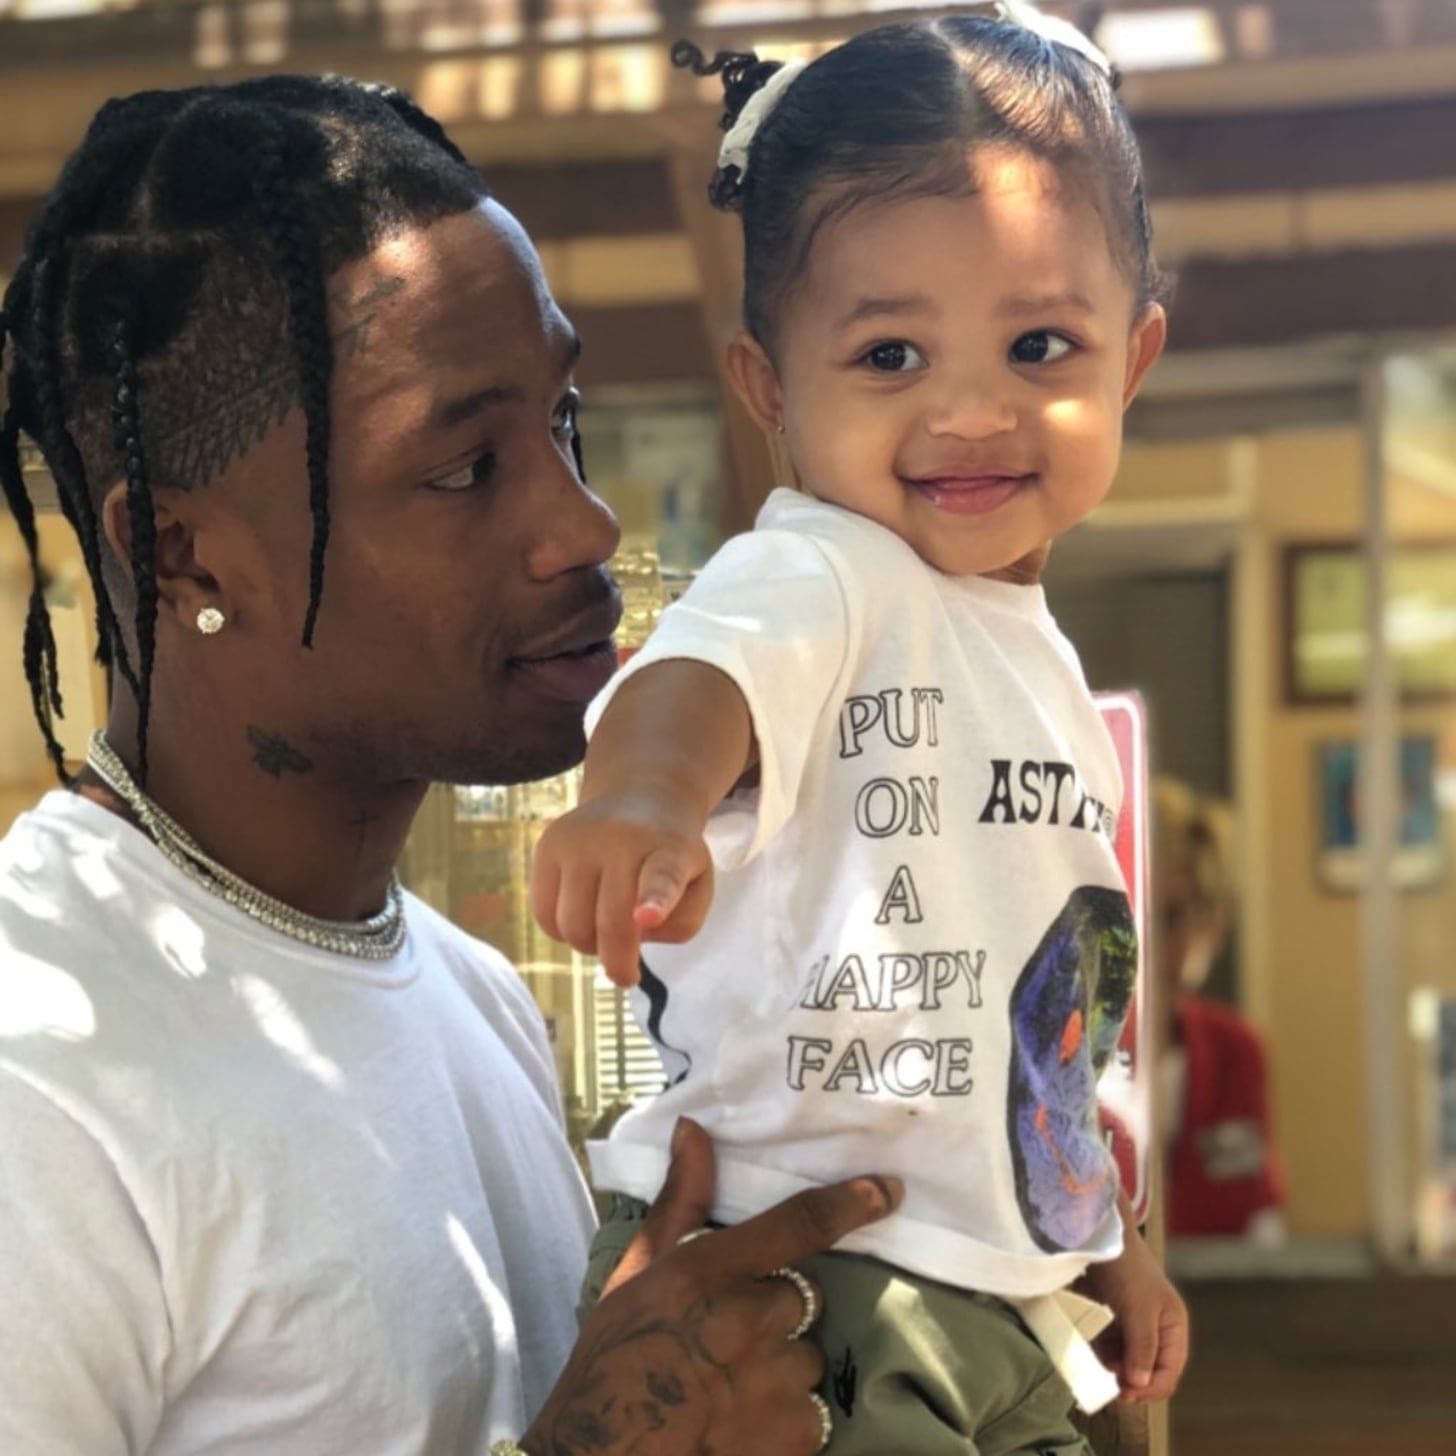 Kylie Jenner's Latest Pics And Videos Featuring Stormi And Travis Scott Have Family And Fans In Awe